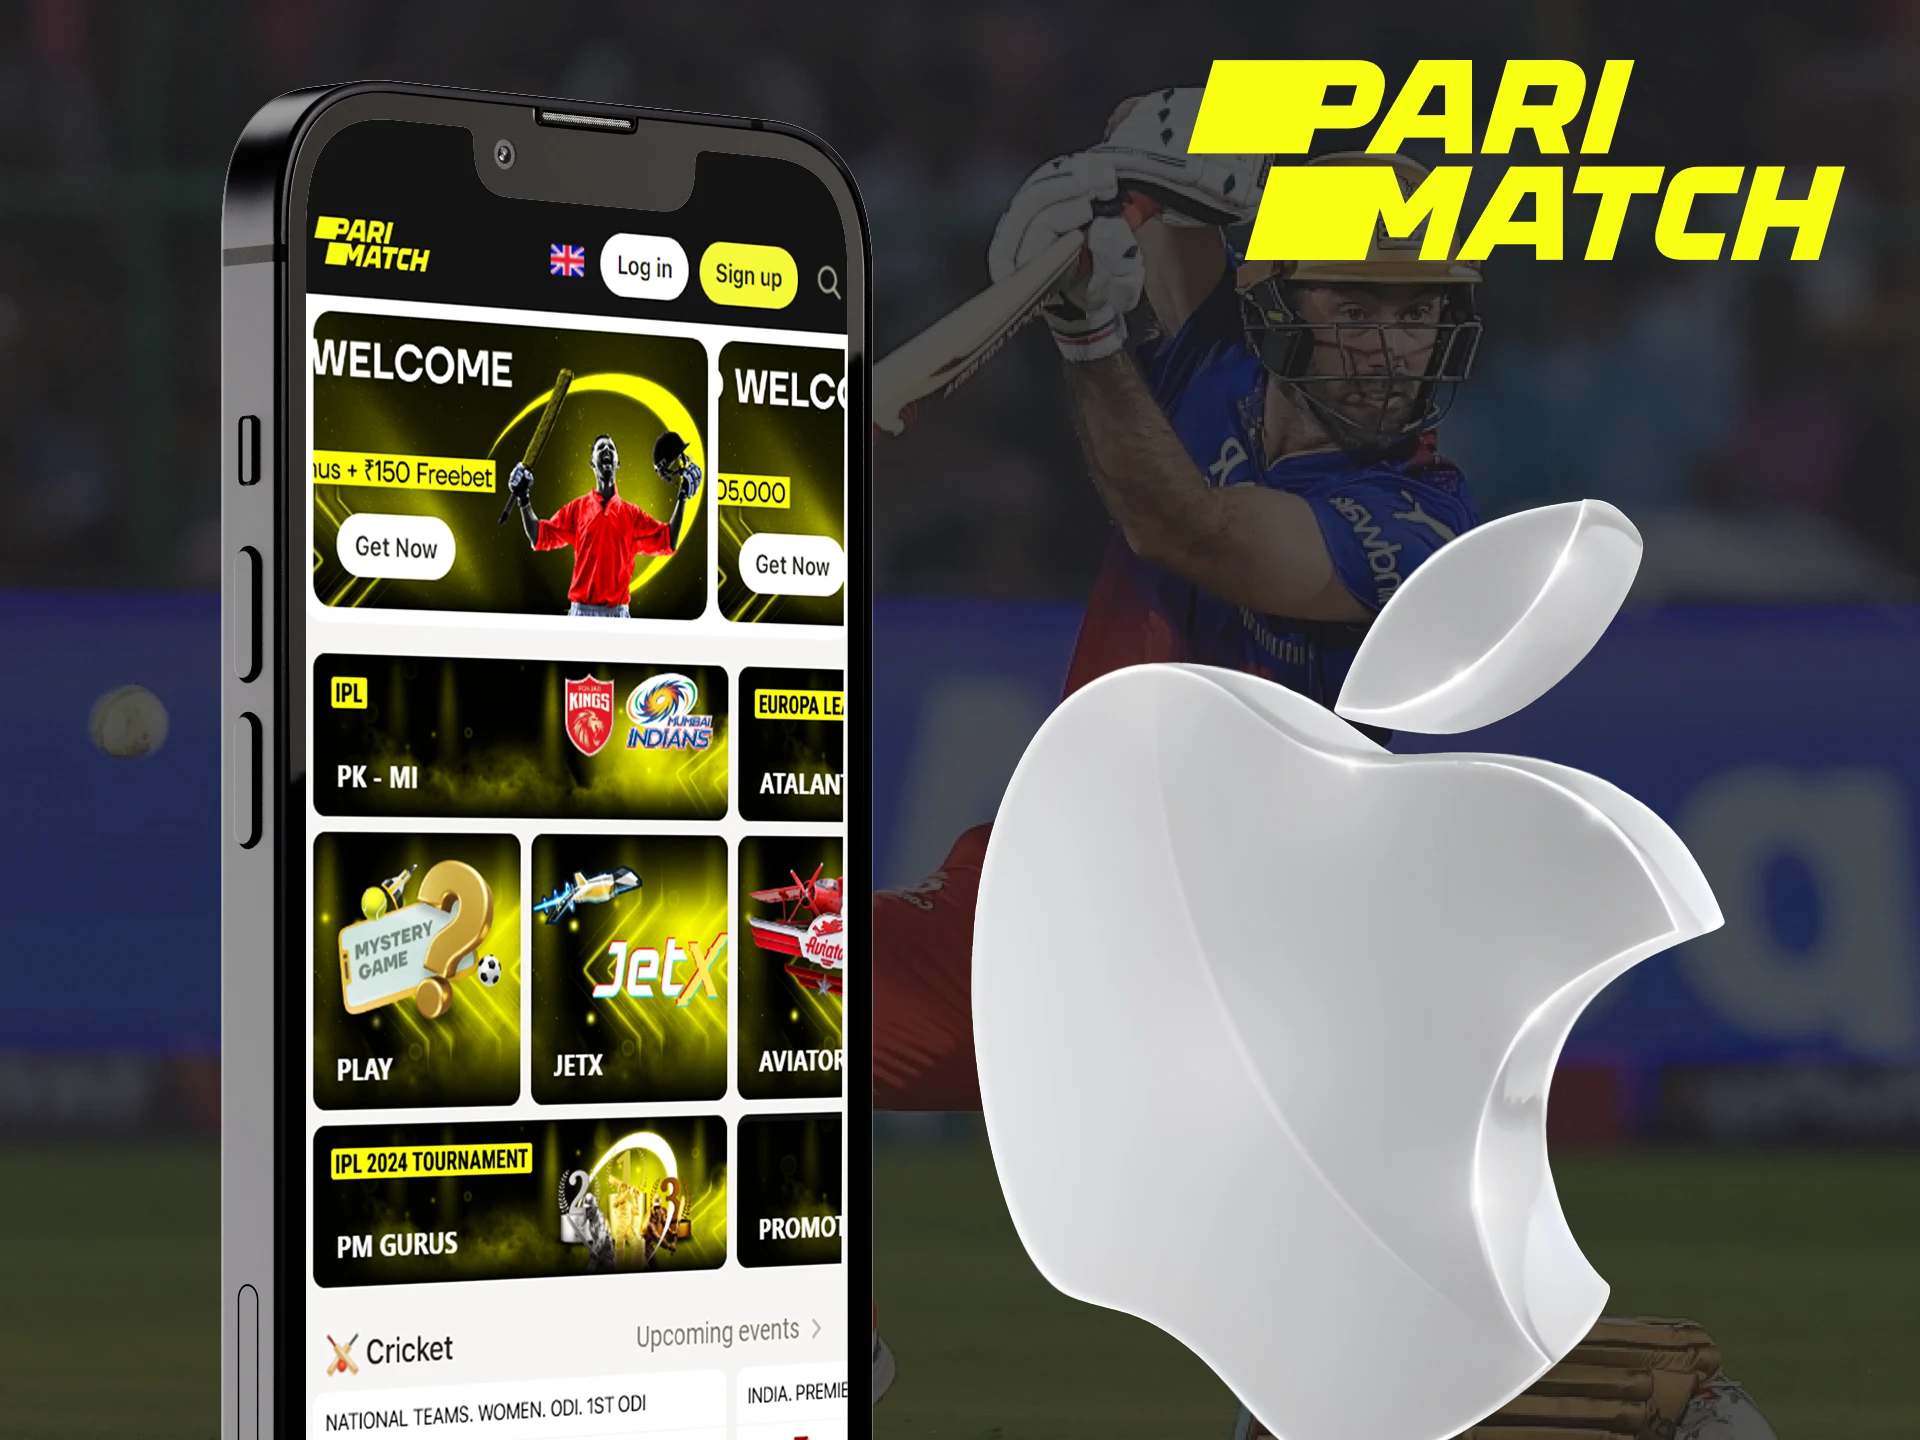 Download the Parimatch app for iOS and start betting wherever you are.